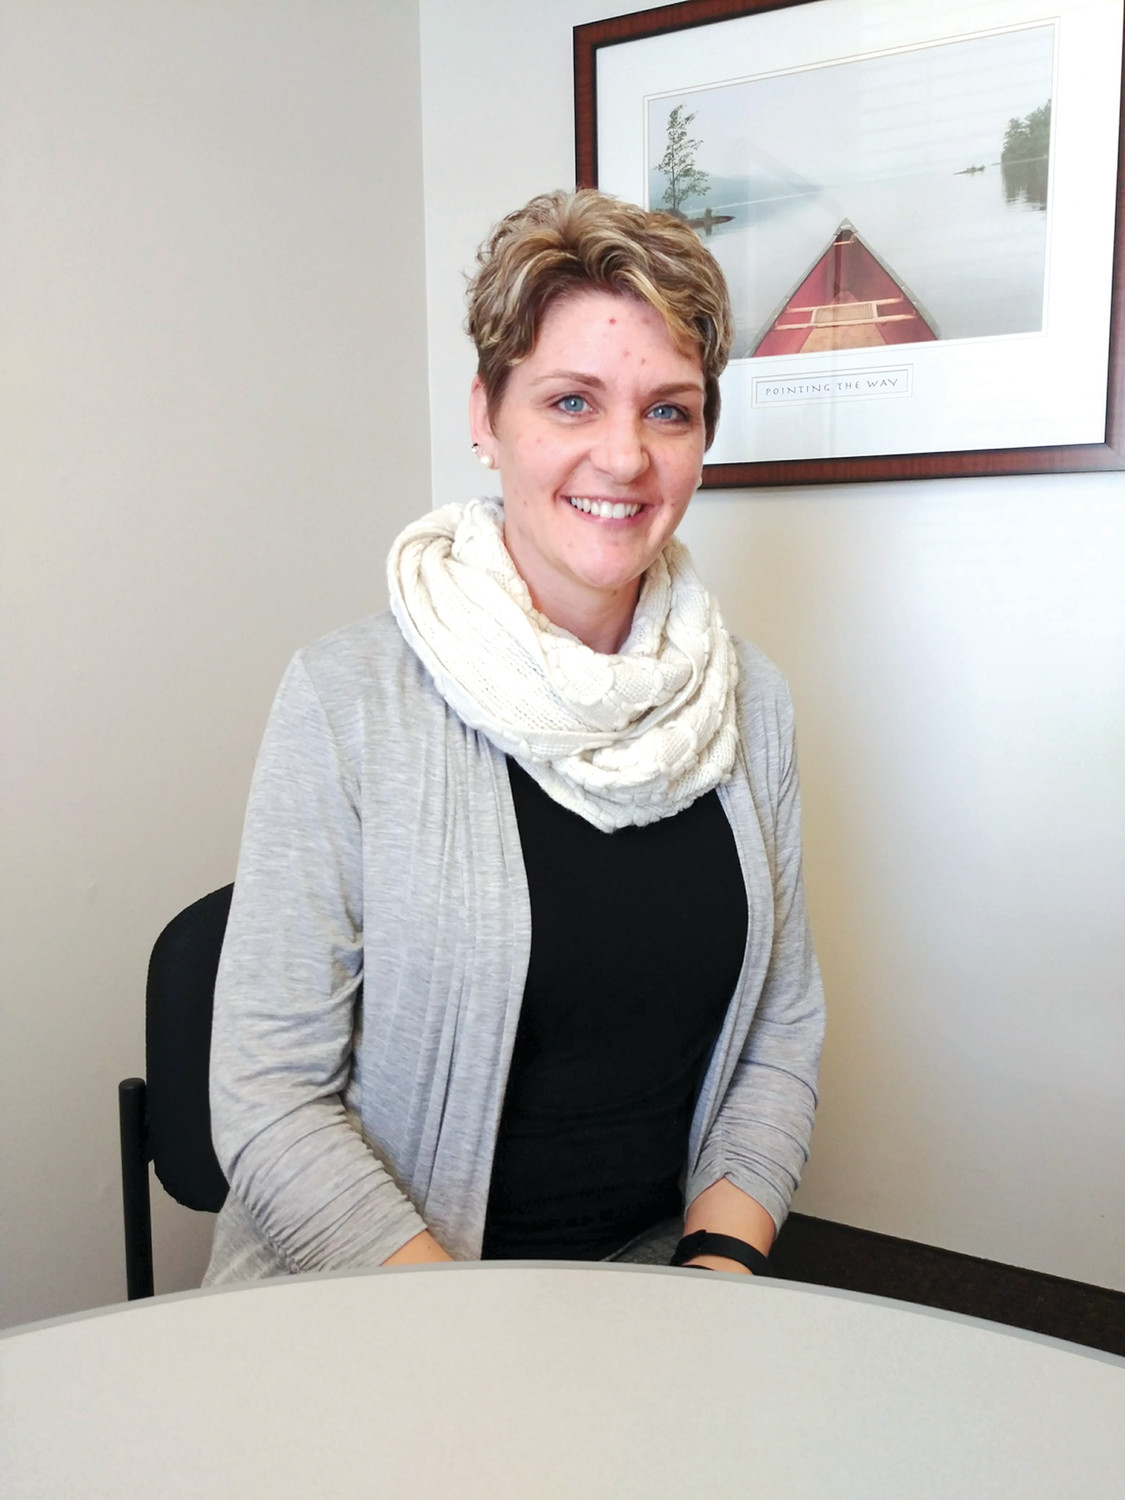 HHPCRI’S NEWEST EMPLOYEE: Jennifer Grace has taken on a new position as Volunteer Coordinator for Hope Hospice and Pallative Care RI, but not before having her own very personal, positive experiences in utilizing services from them first.